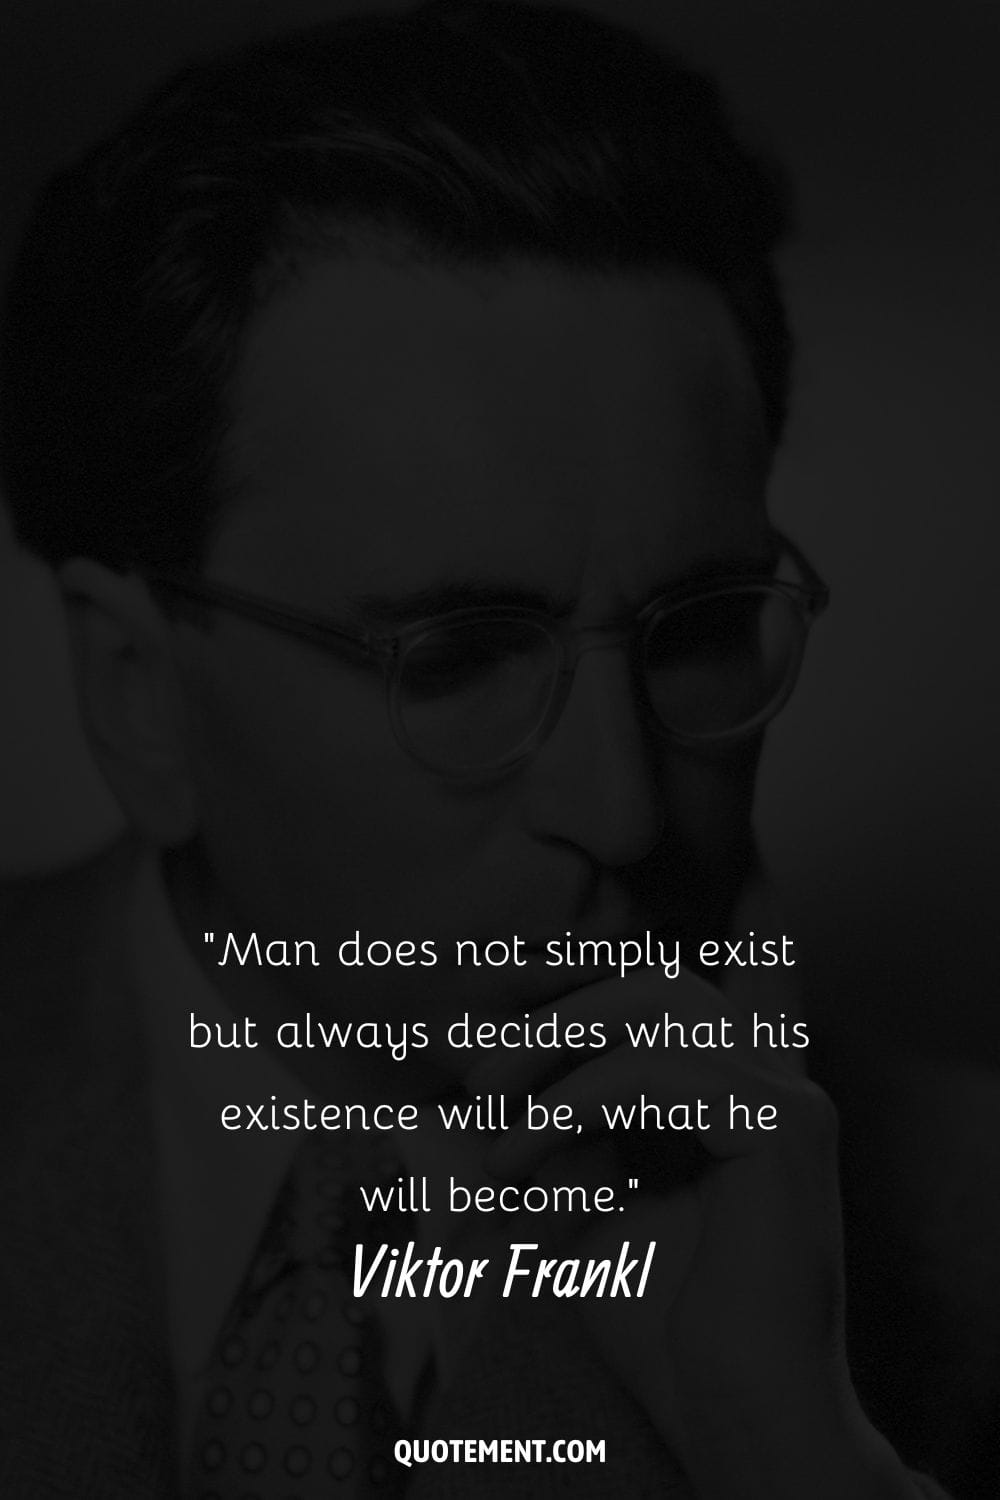 Viktor Frankl's image representing his quote about existence.